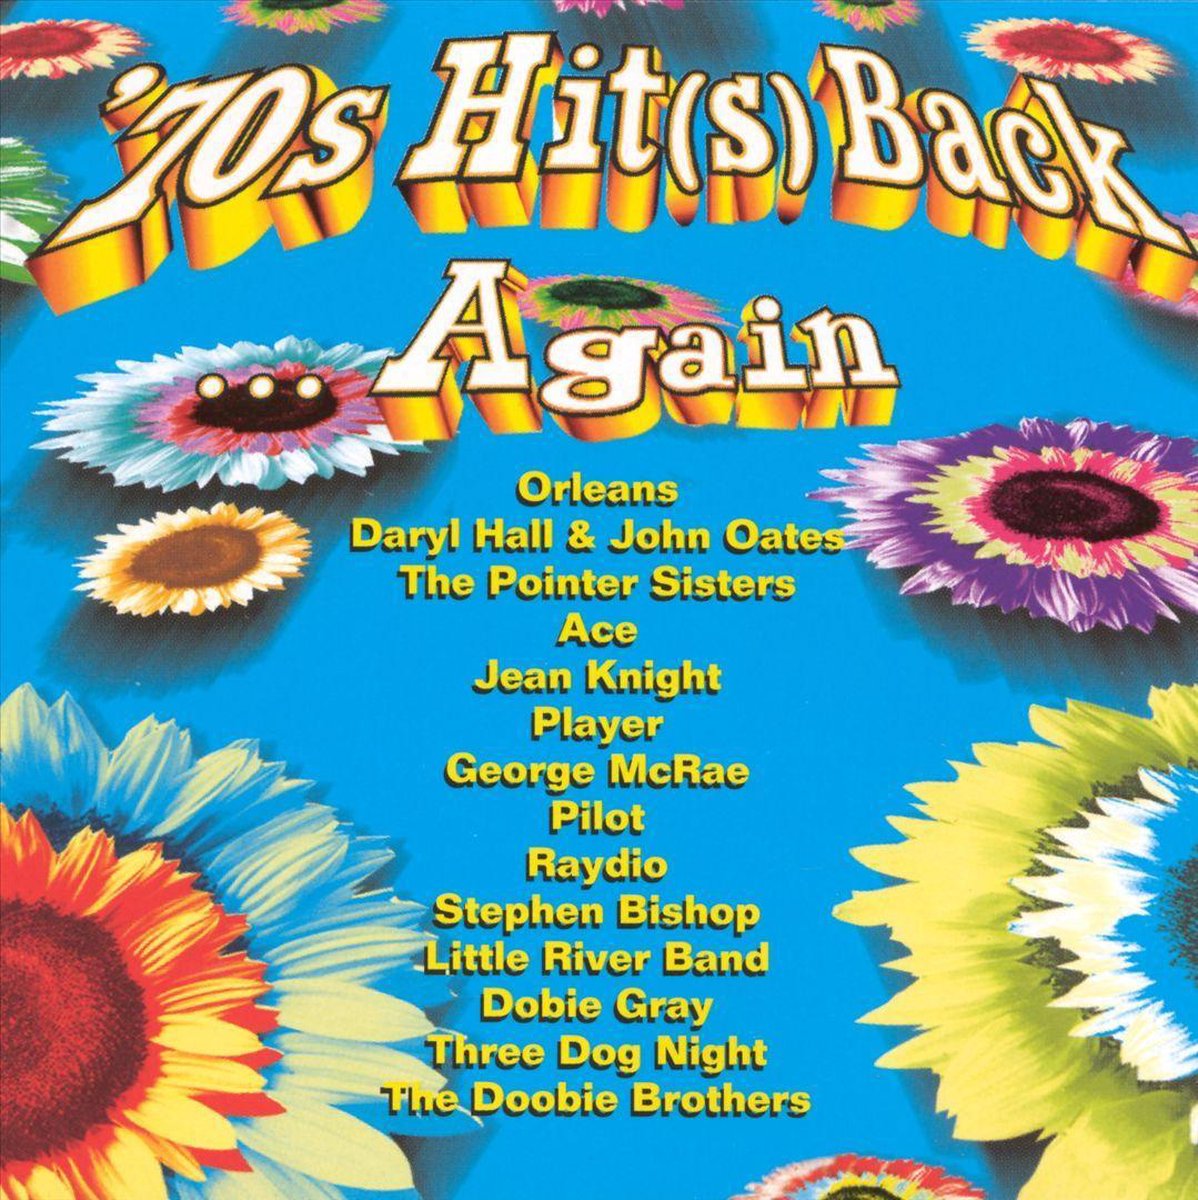 70's Hits Back Again - various artists